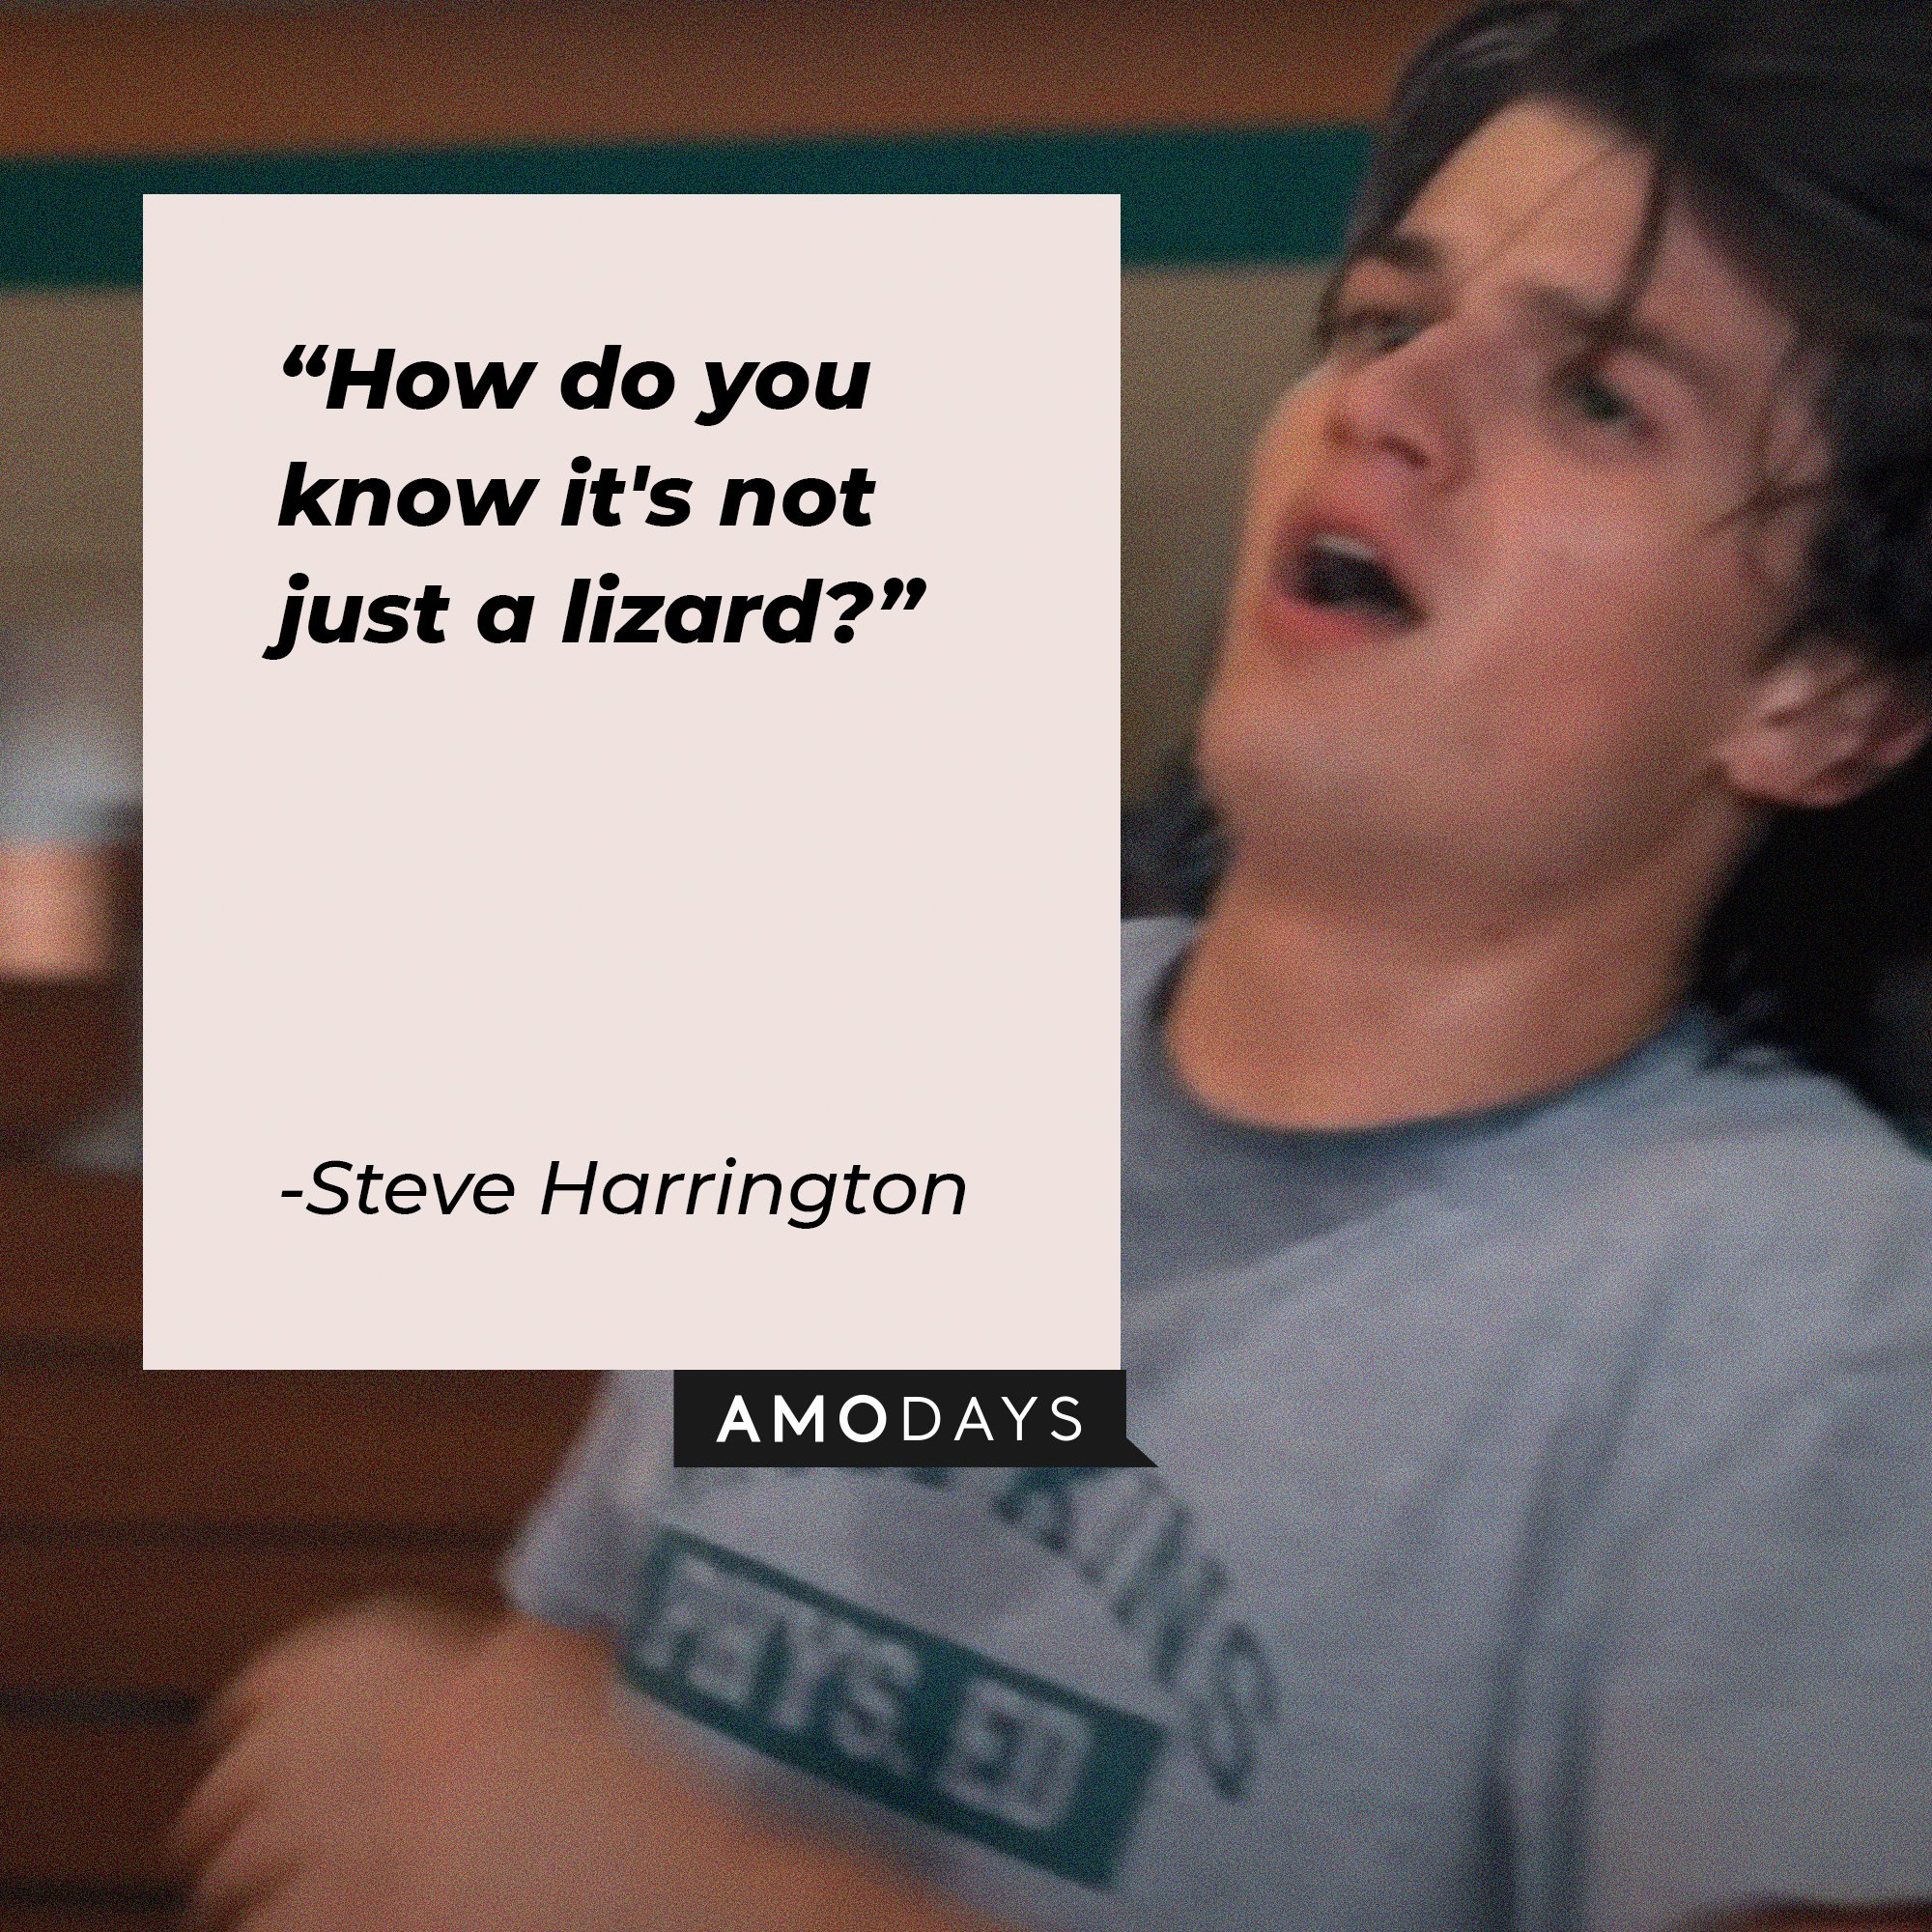  Steve Harrington's quote: “How do you know it's not just a lizard?” | Image: AmoDays  